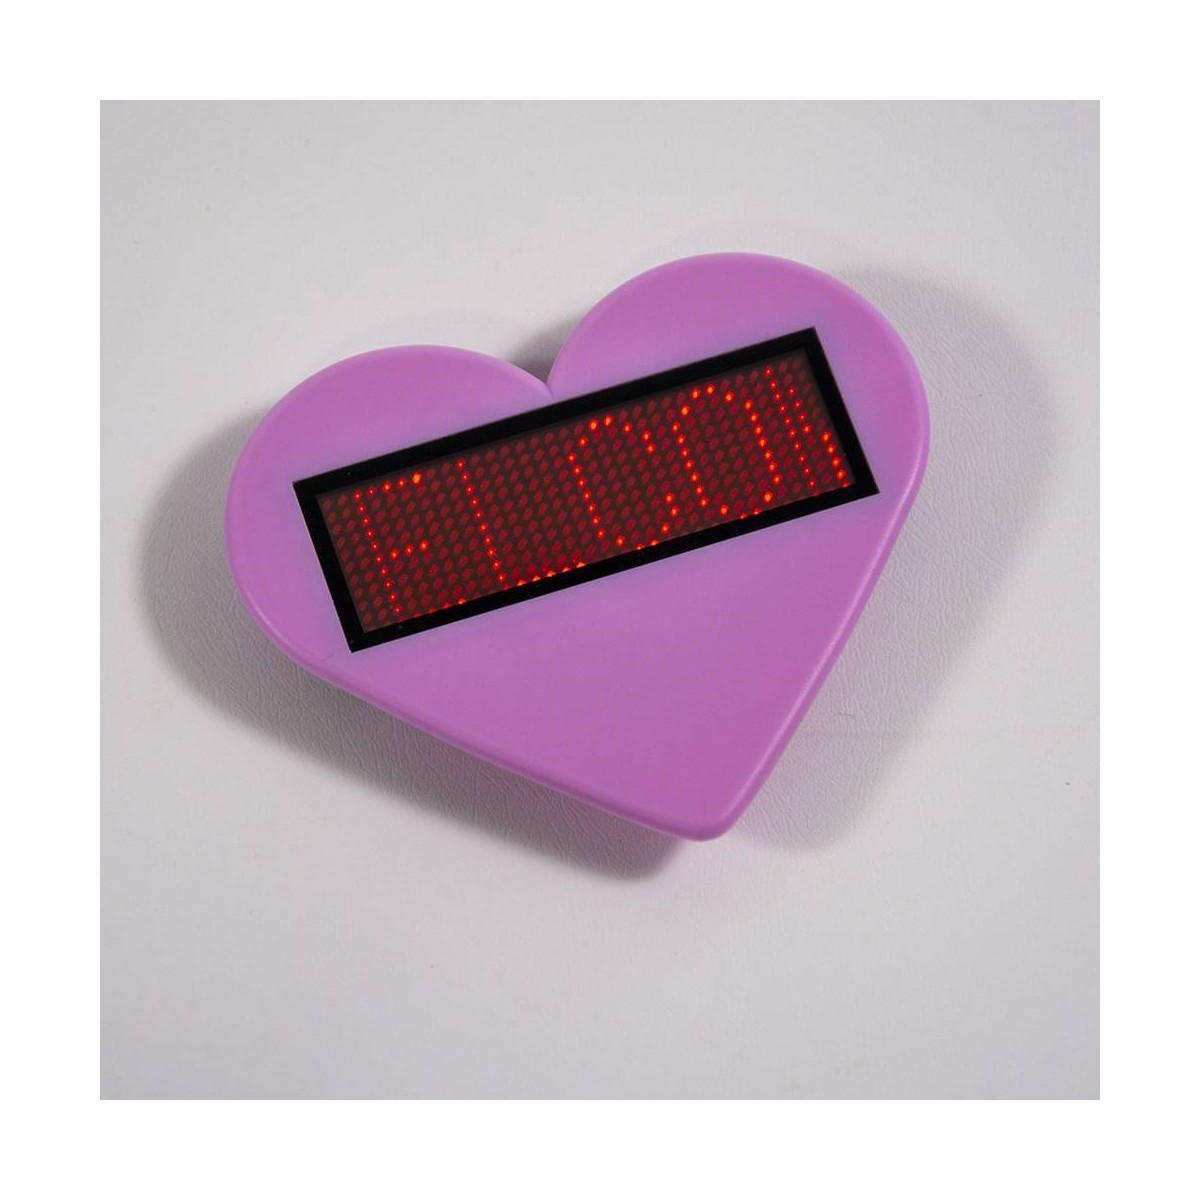 DISTINCTIVE PORTABLE PROGRAMMABLE LED SIGN WITH HEART SHAPE